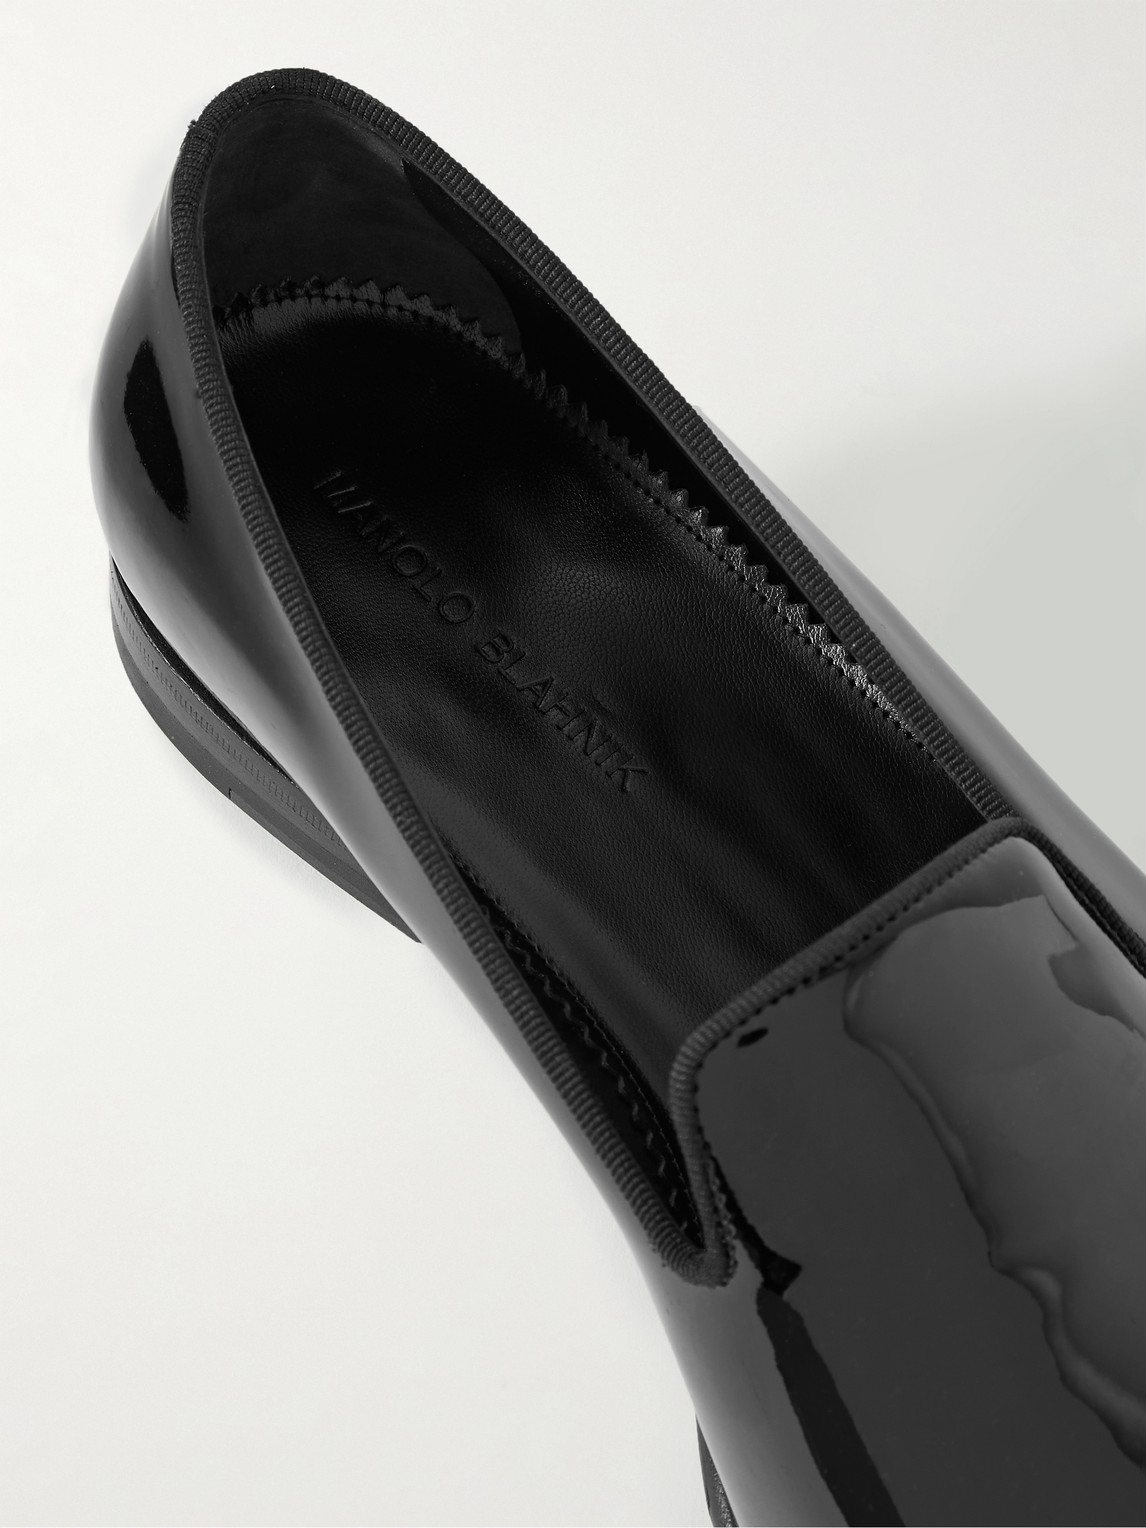 Shop Manolo Blahnik Mario Grosgrain-trimmed Patent-leather Loafers In Black